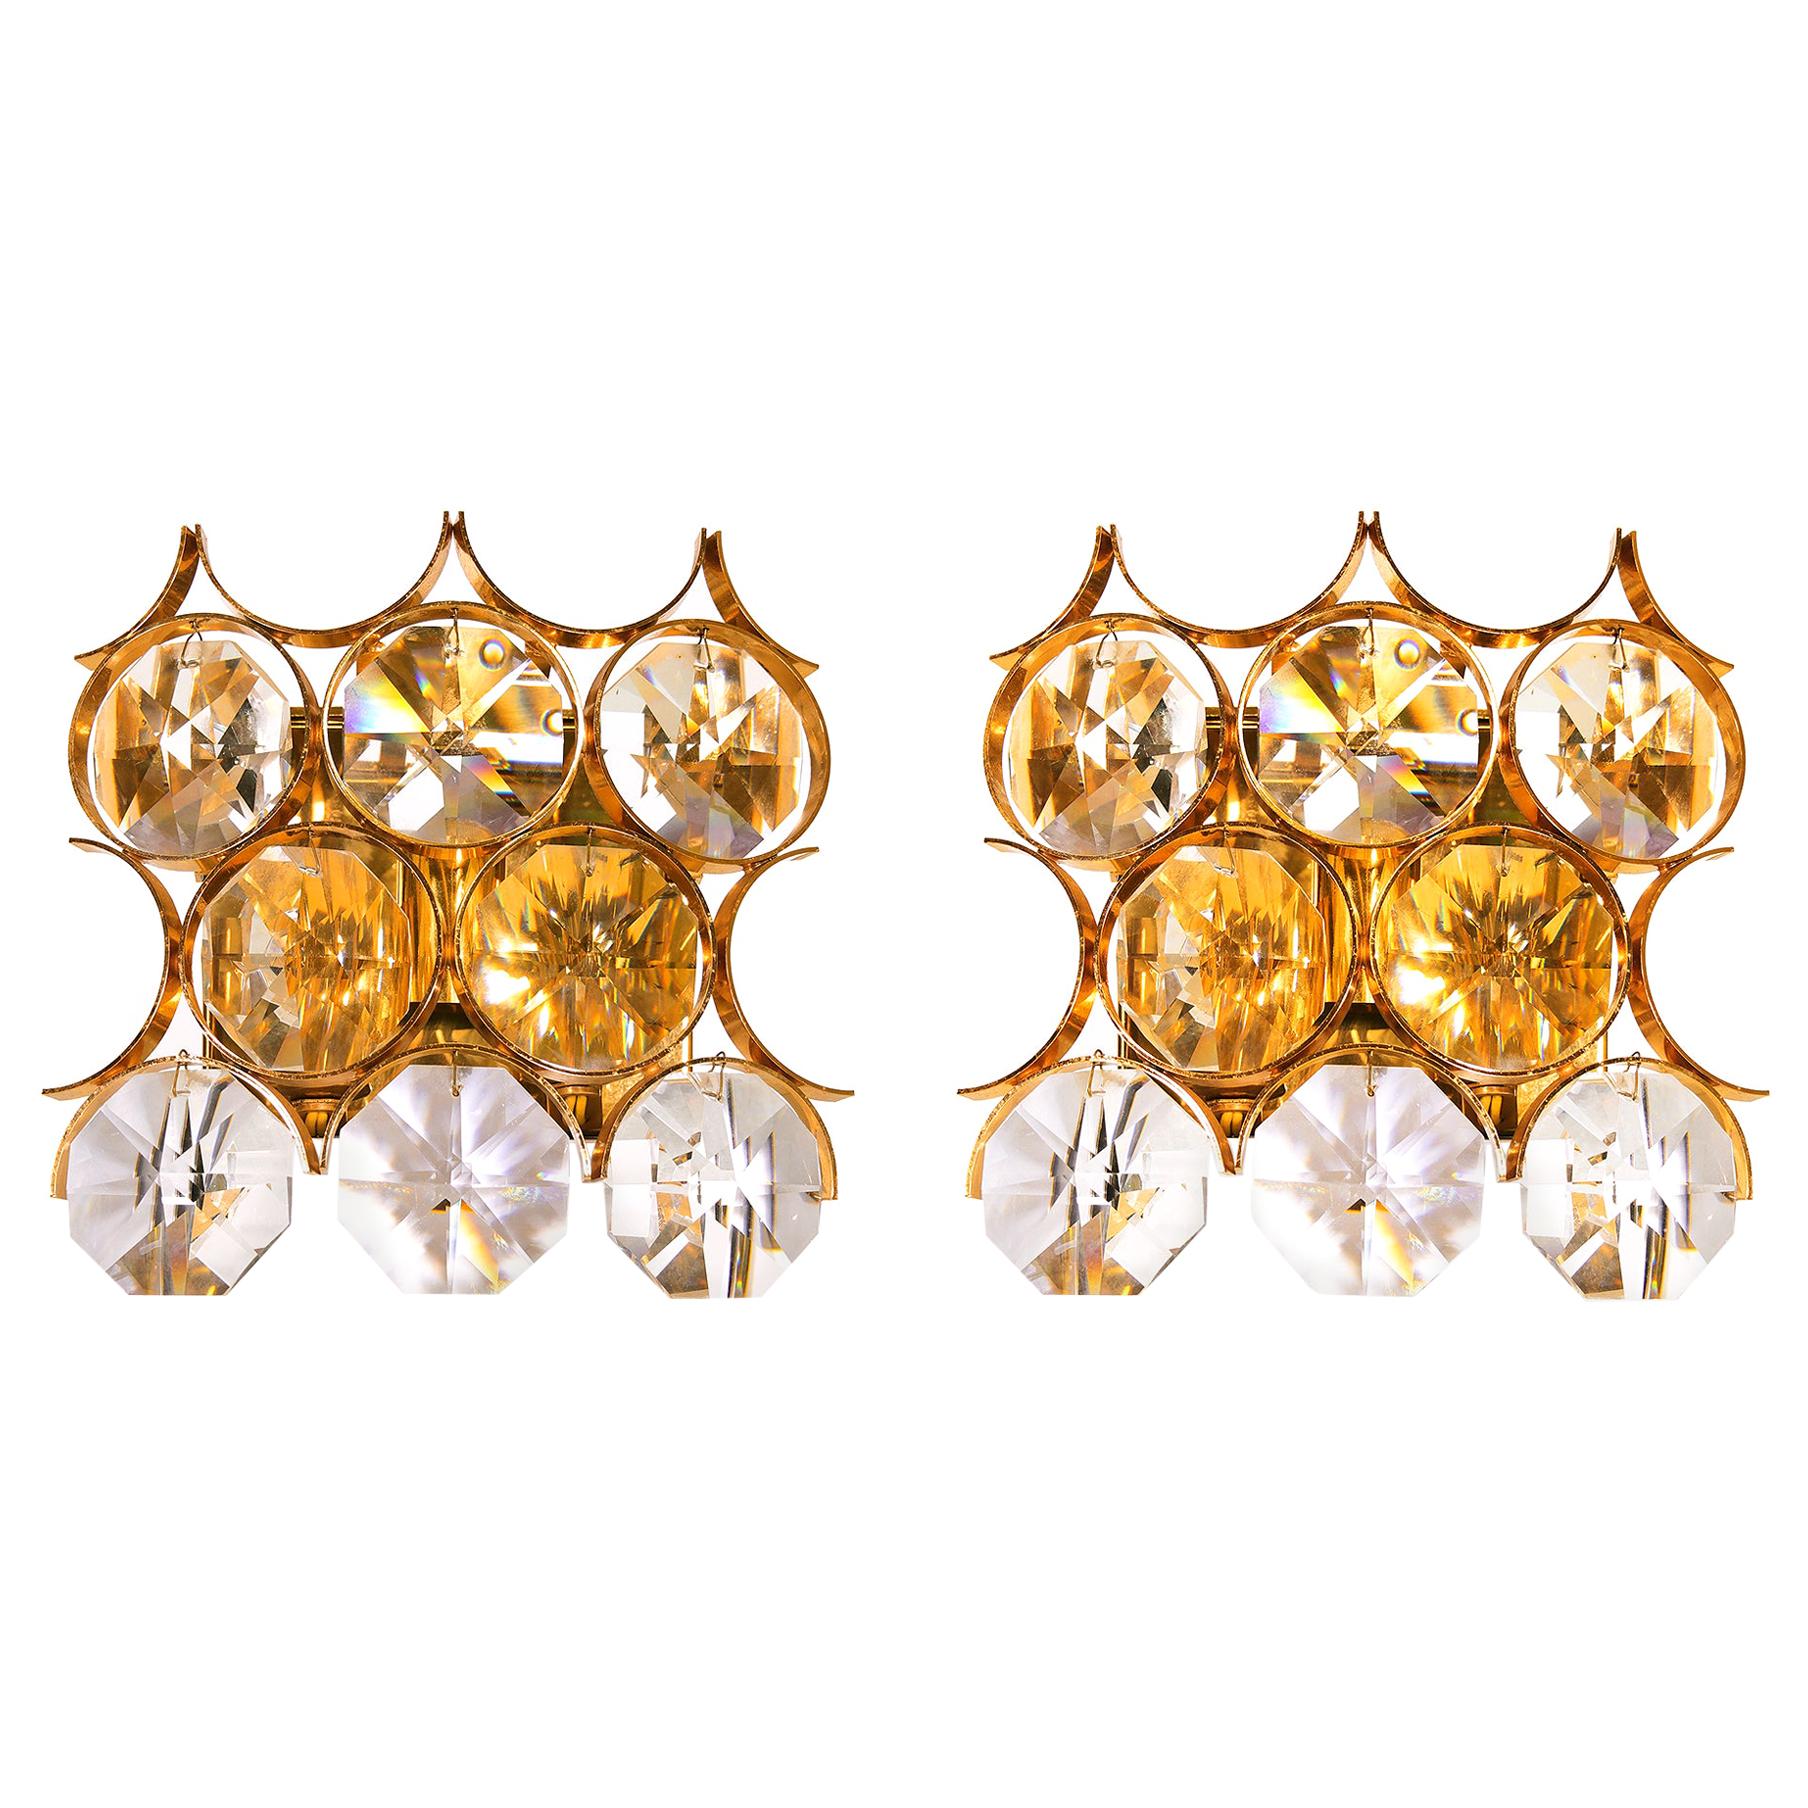 1960 German Palwa Pair of Wall Sconces Crystal Glass & Gilt Brass